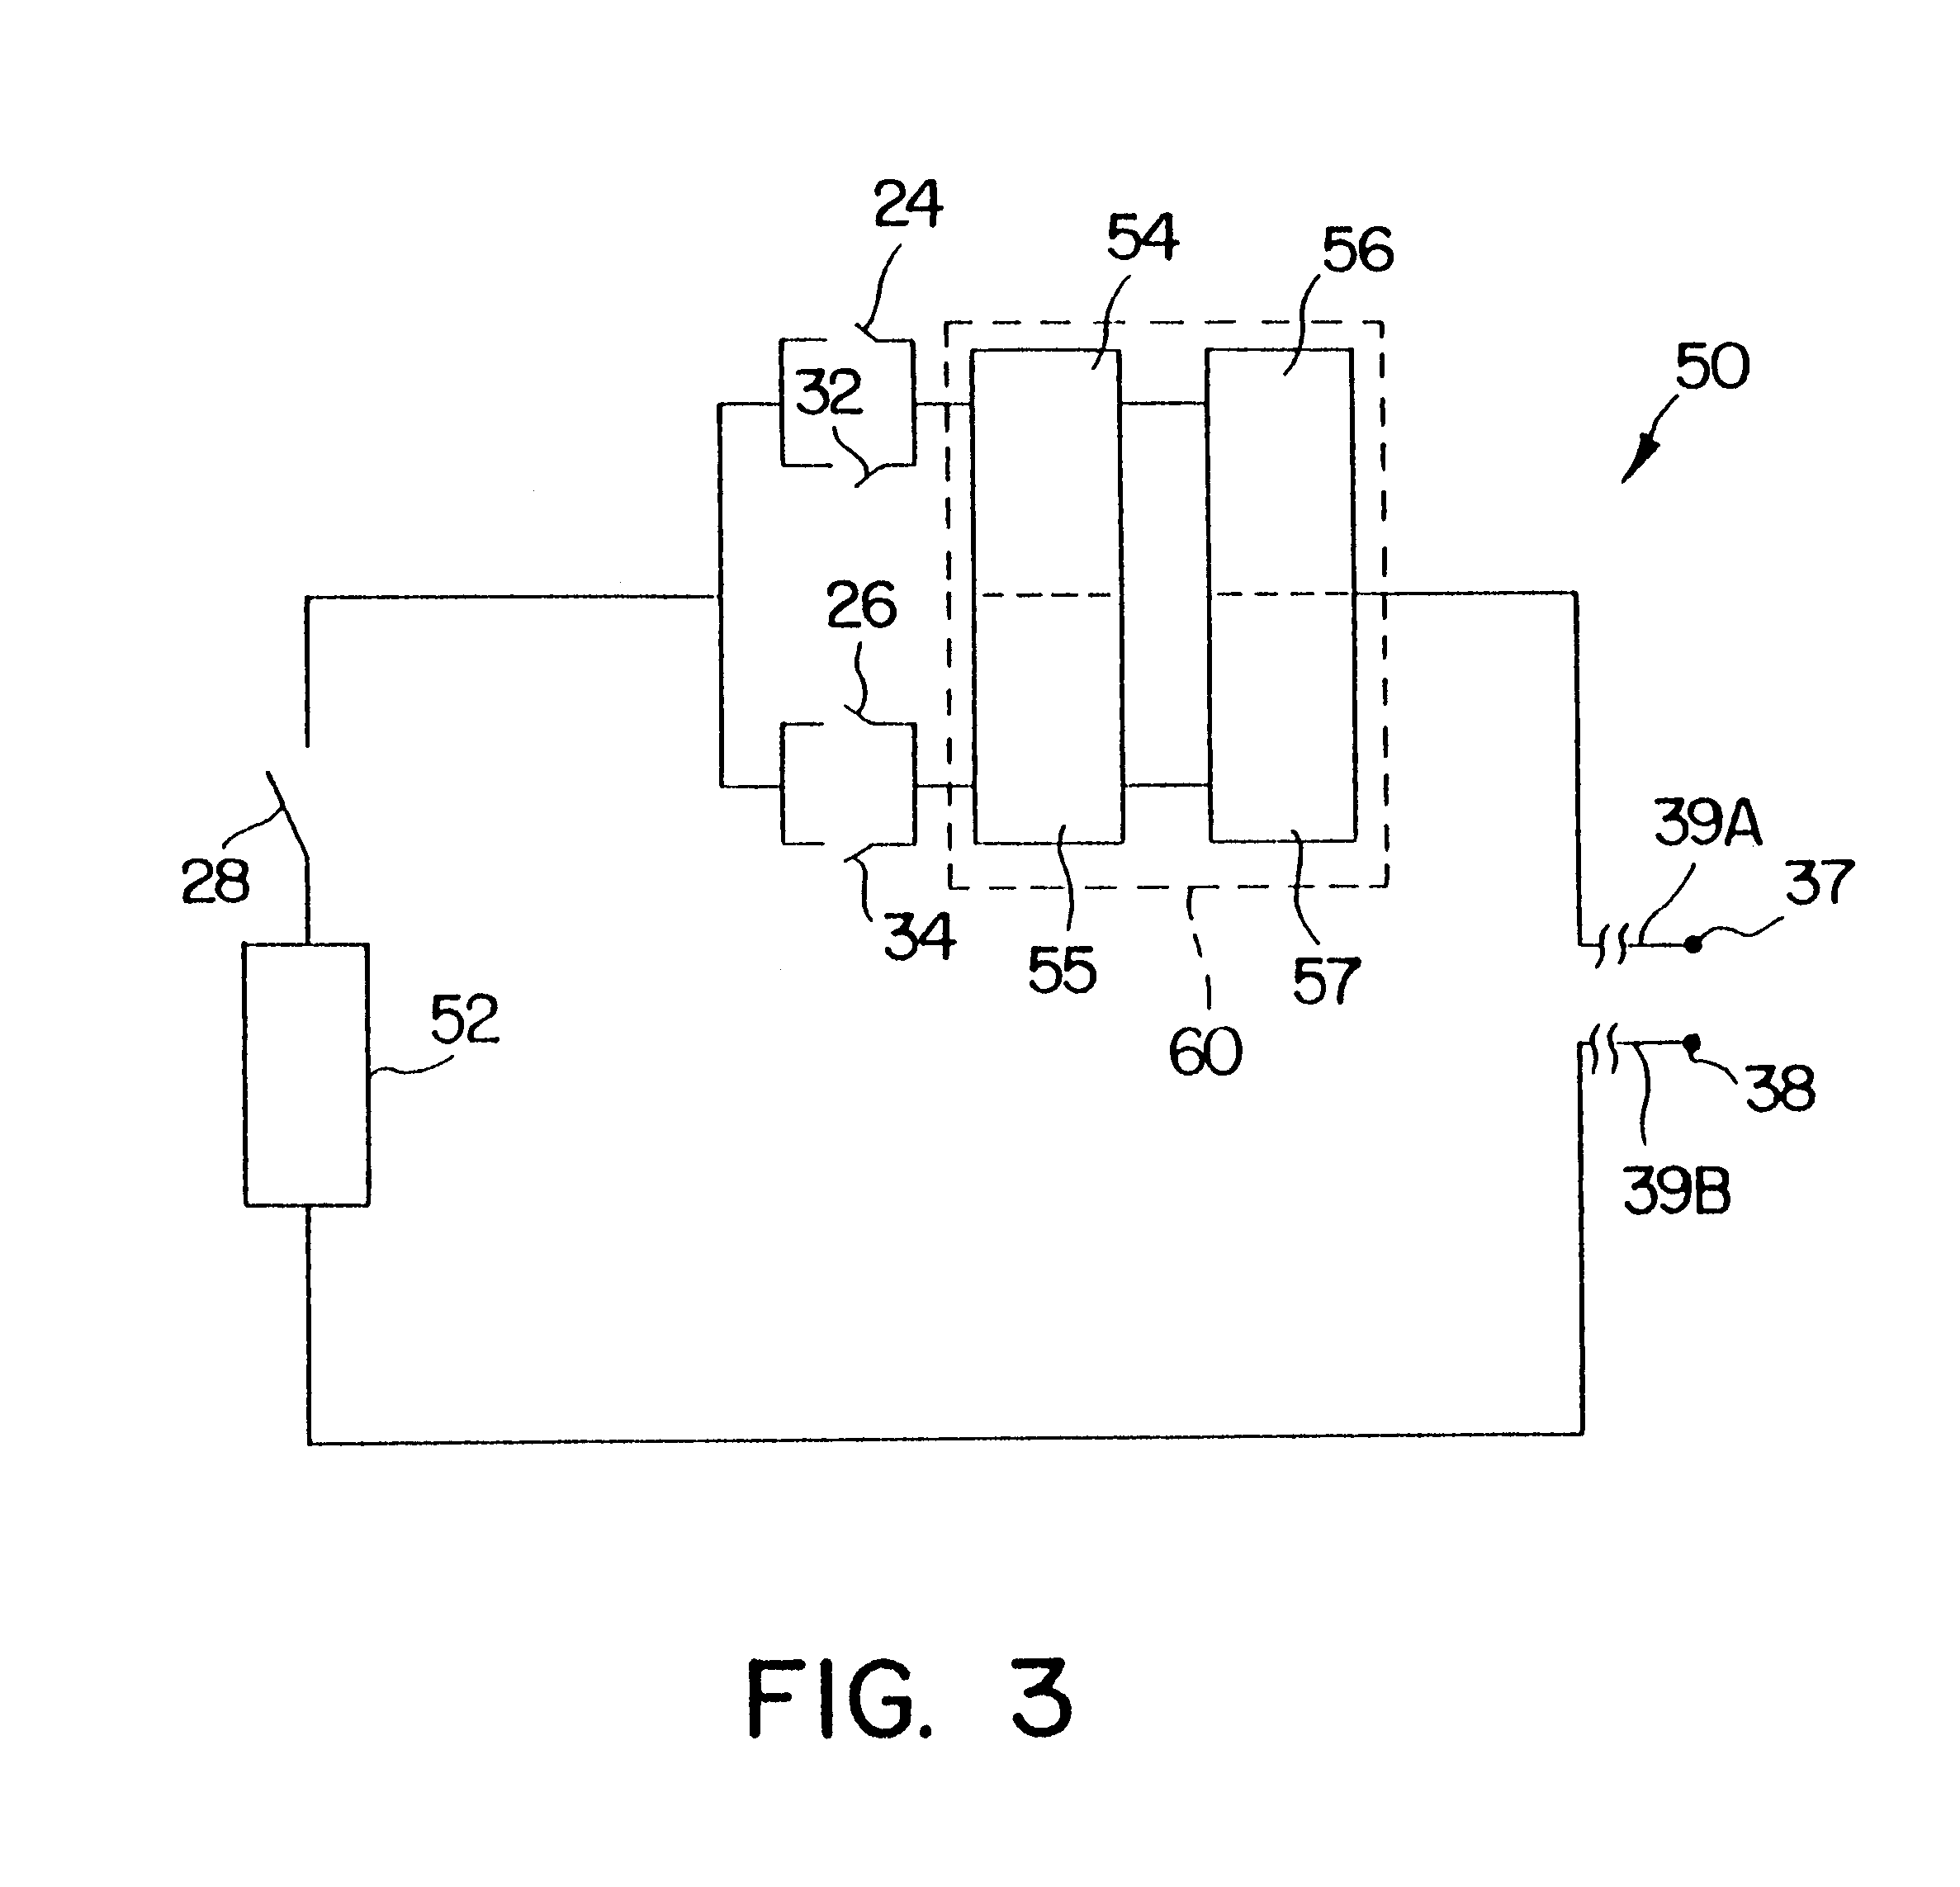 Method and device for electronically controlling the beating of a heart using venous electrical stimulation of nerve fibers